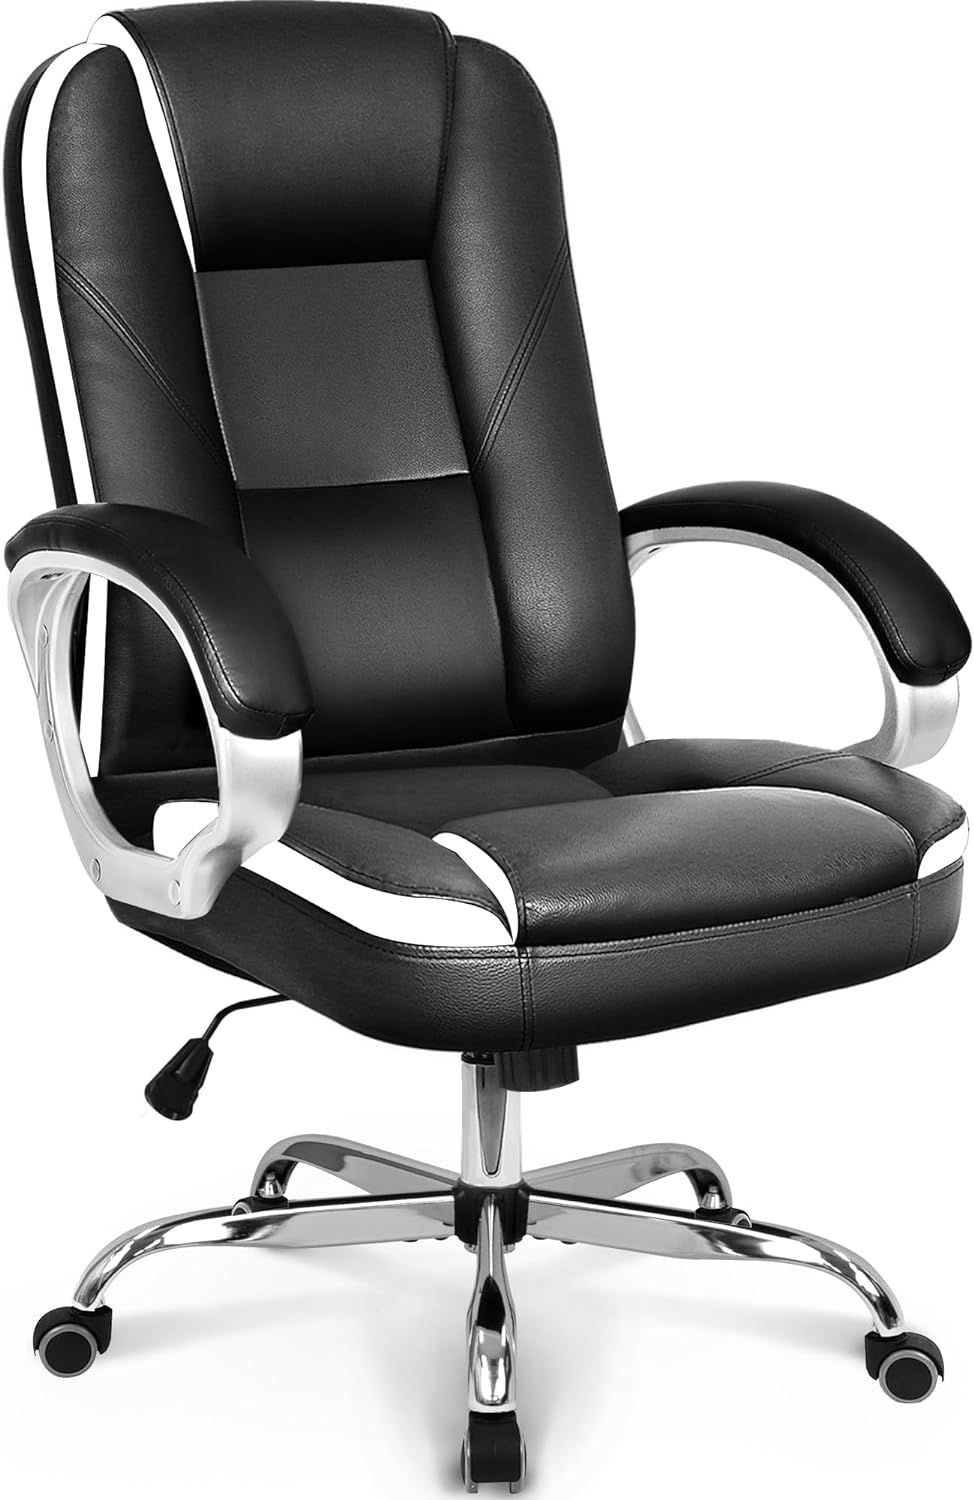 NEO CHAIR Office Computer Desk Chair Gaming